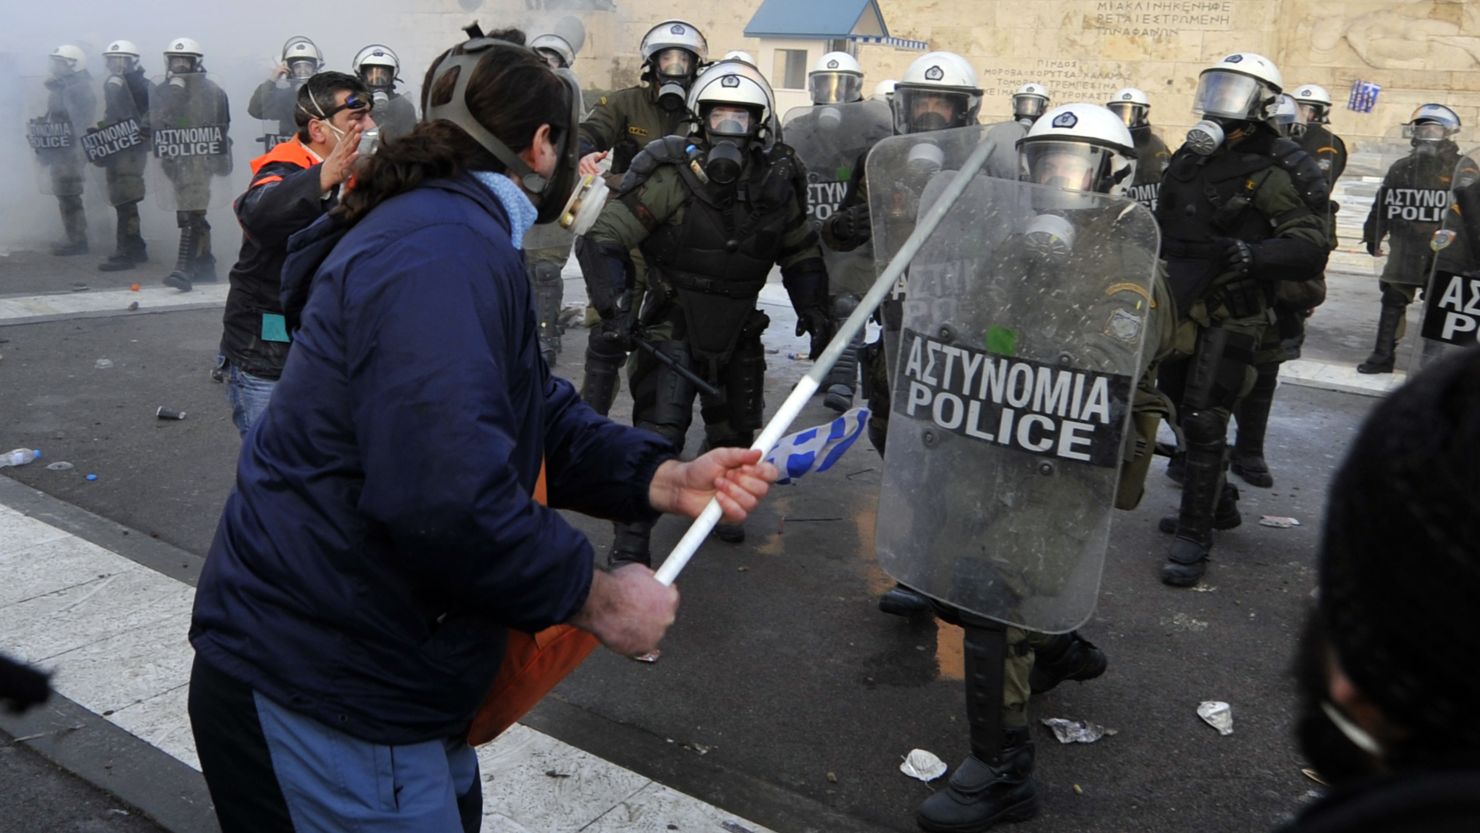 Protesters clash with riot police in front of the Greek Parliament in Athens on February 12, 2012.